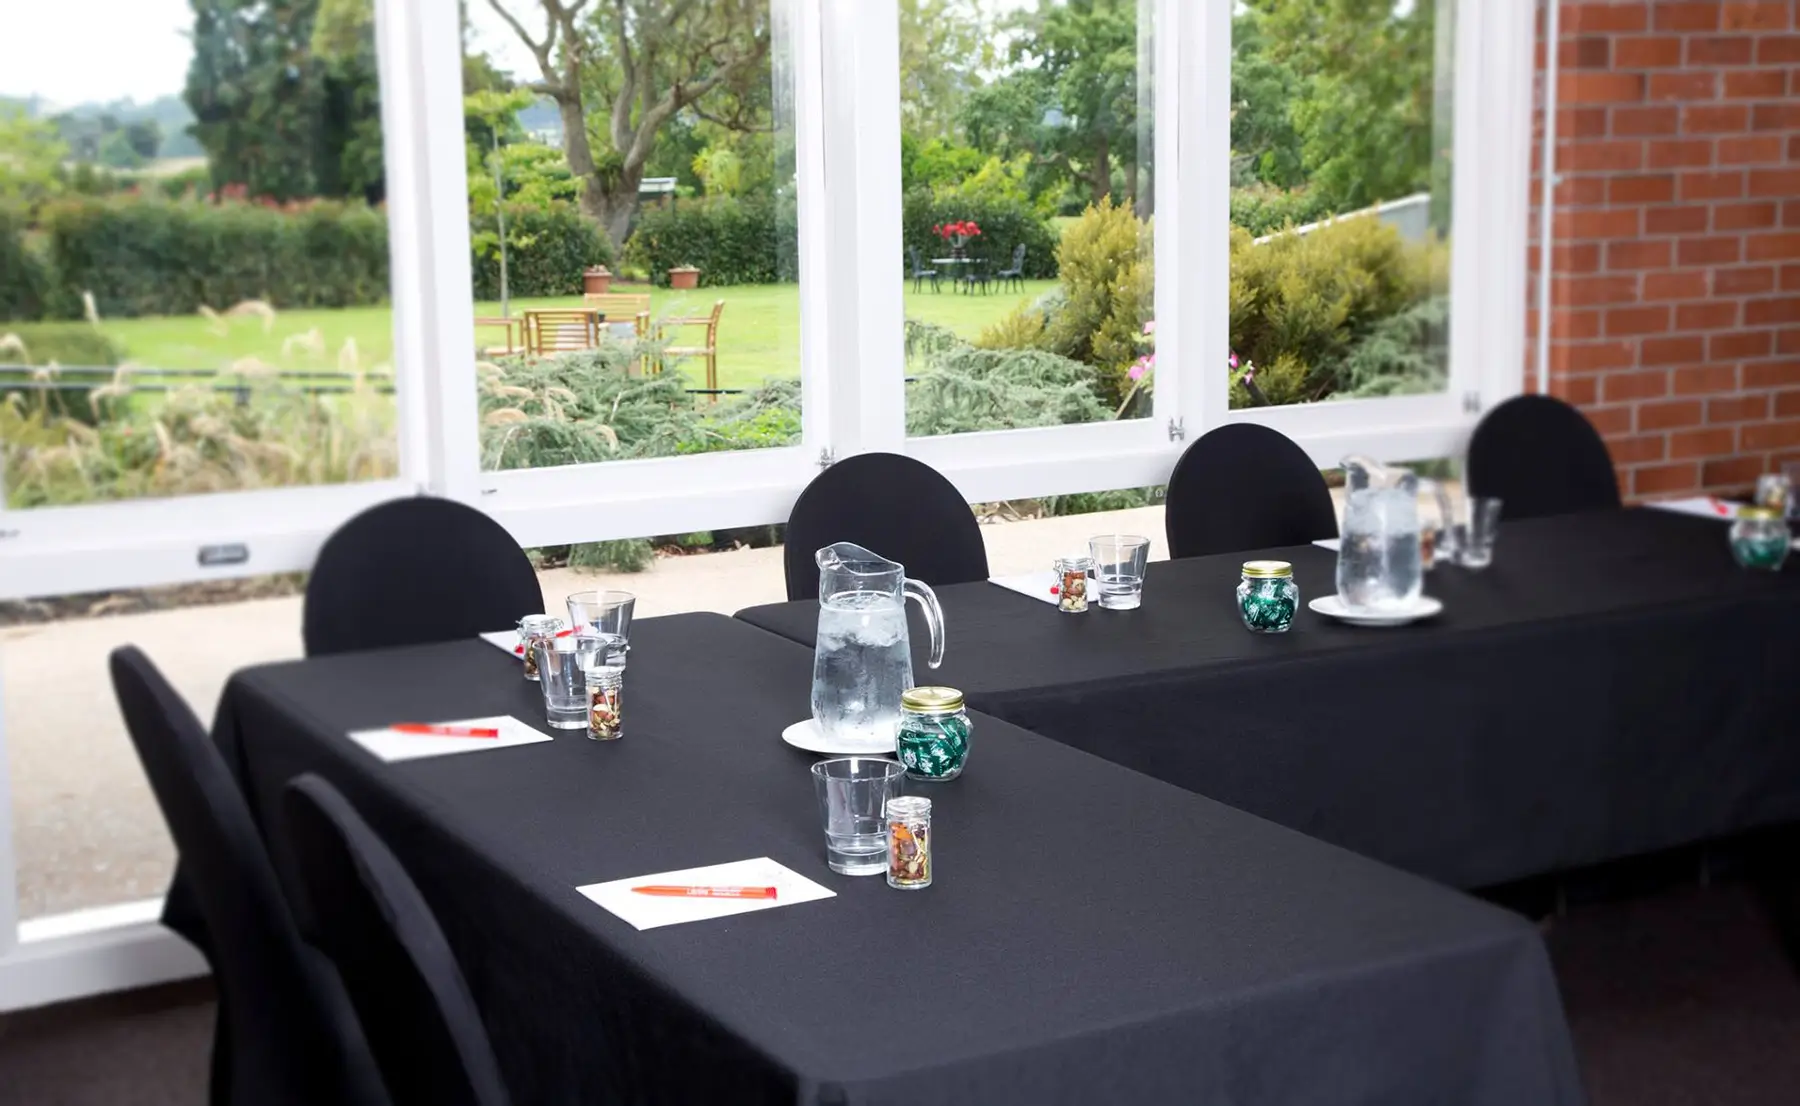 Carafes of water and notebooks are set up on cloth-covered tables, ready for a workshop.